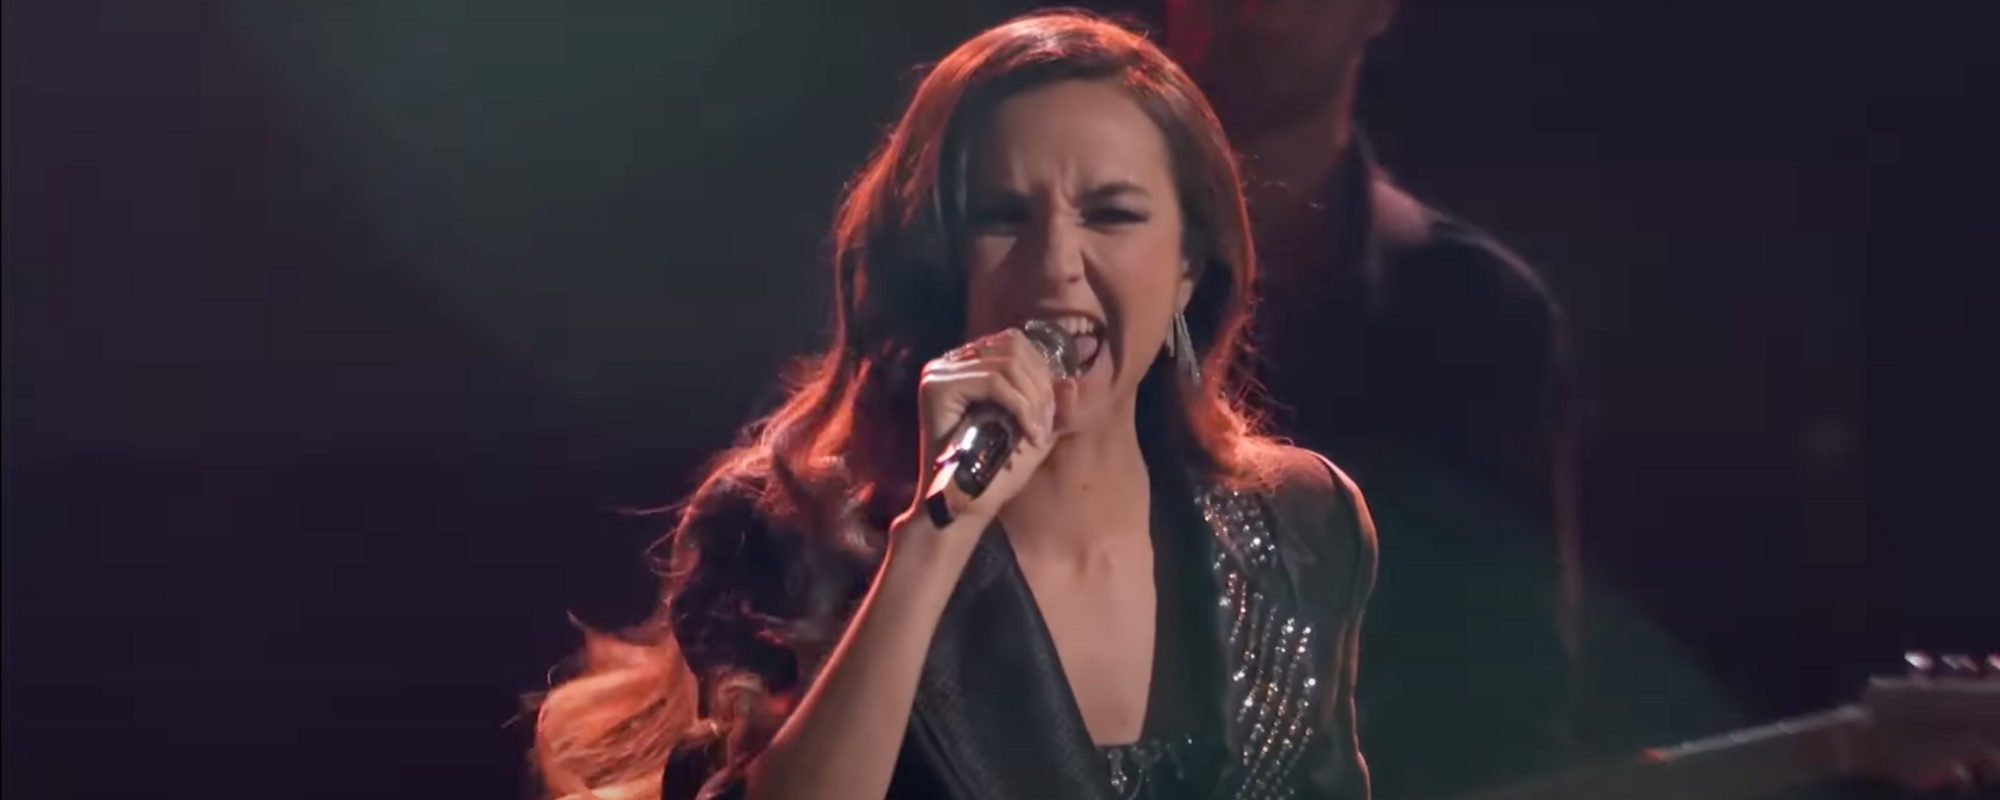 Team Chance’s Maddi Jane Brings Star Power to ‘The Voice’ Stage With Tate McRae’s “Greedy”